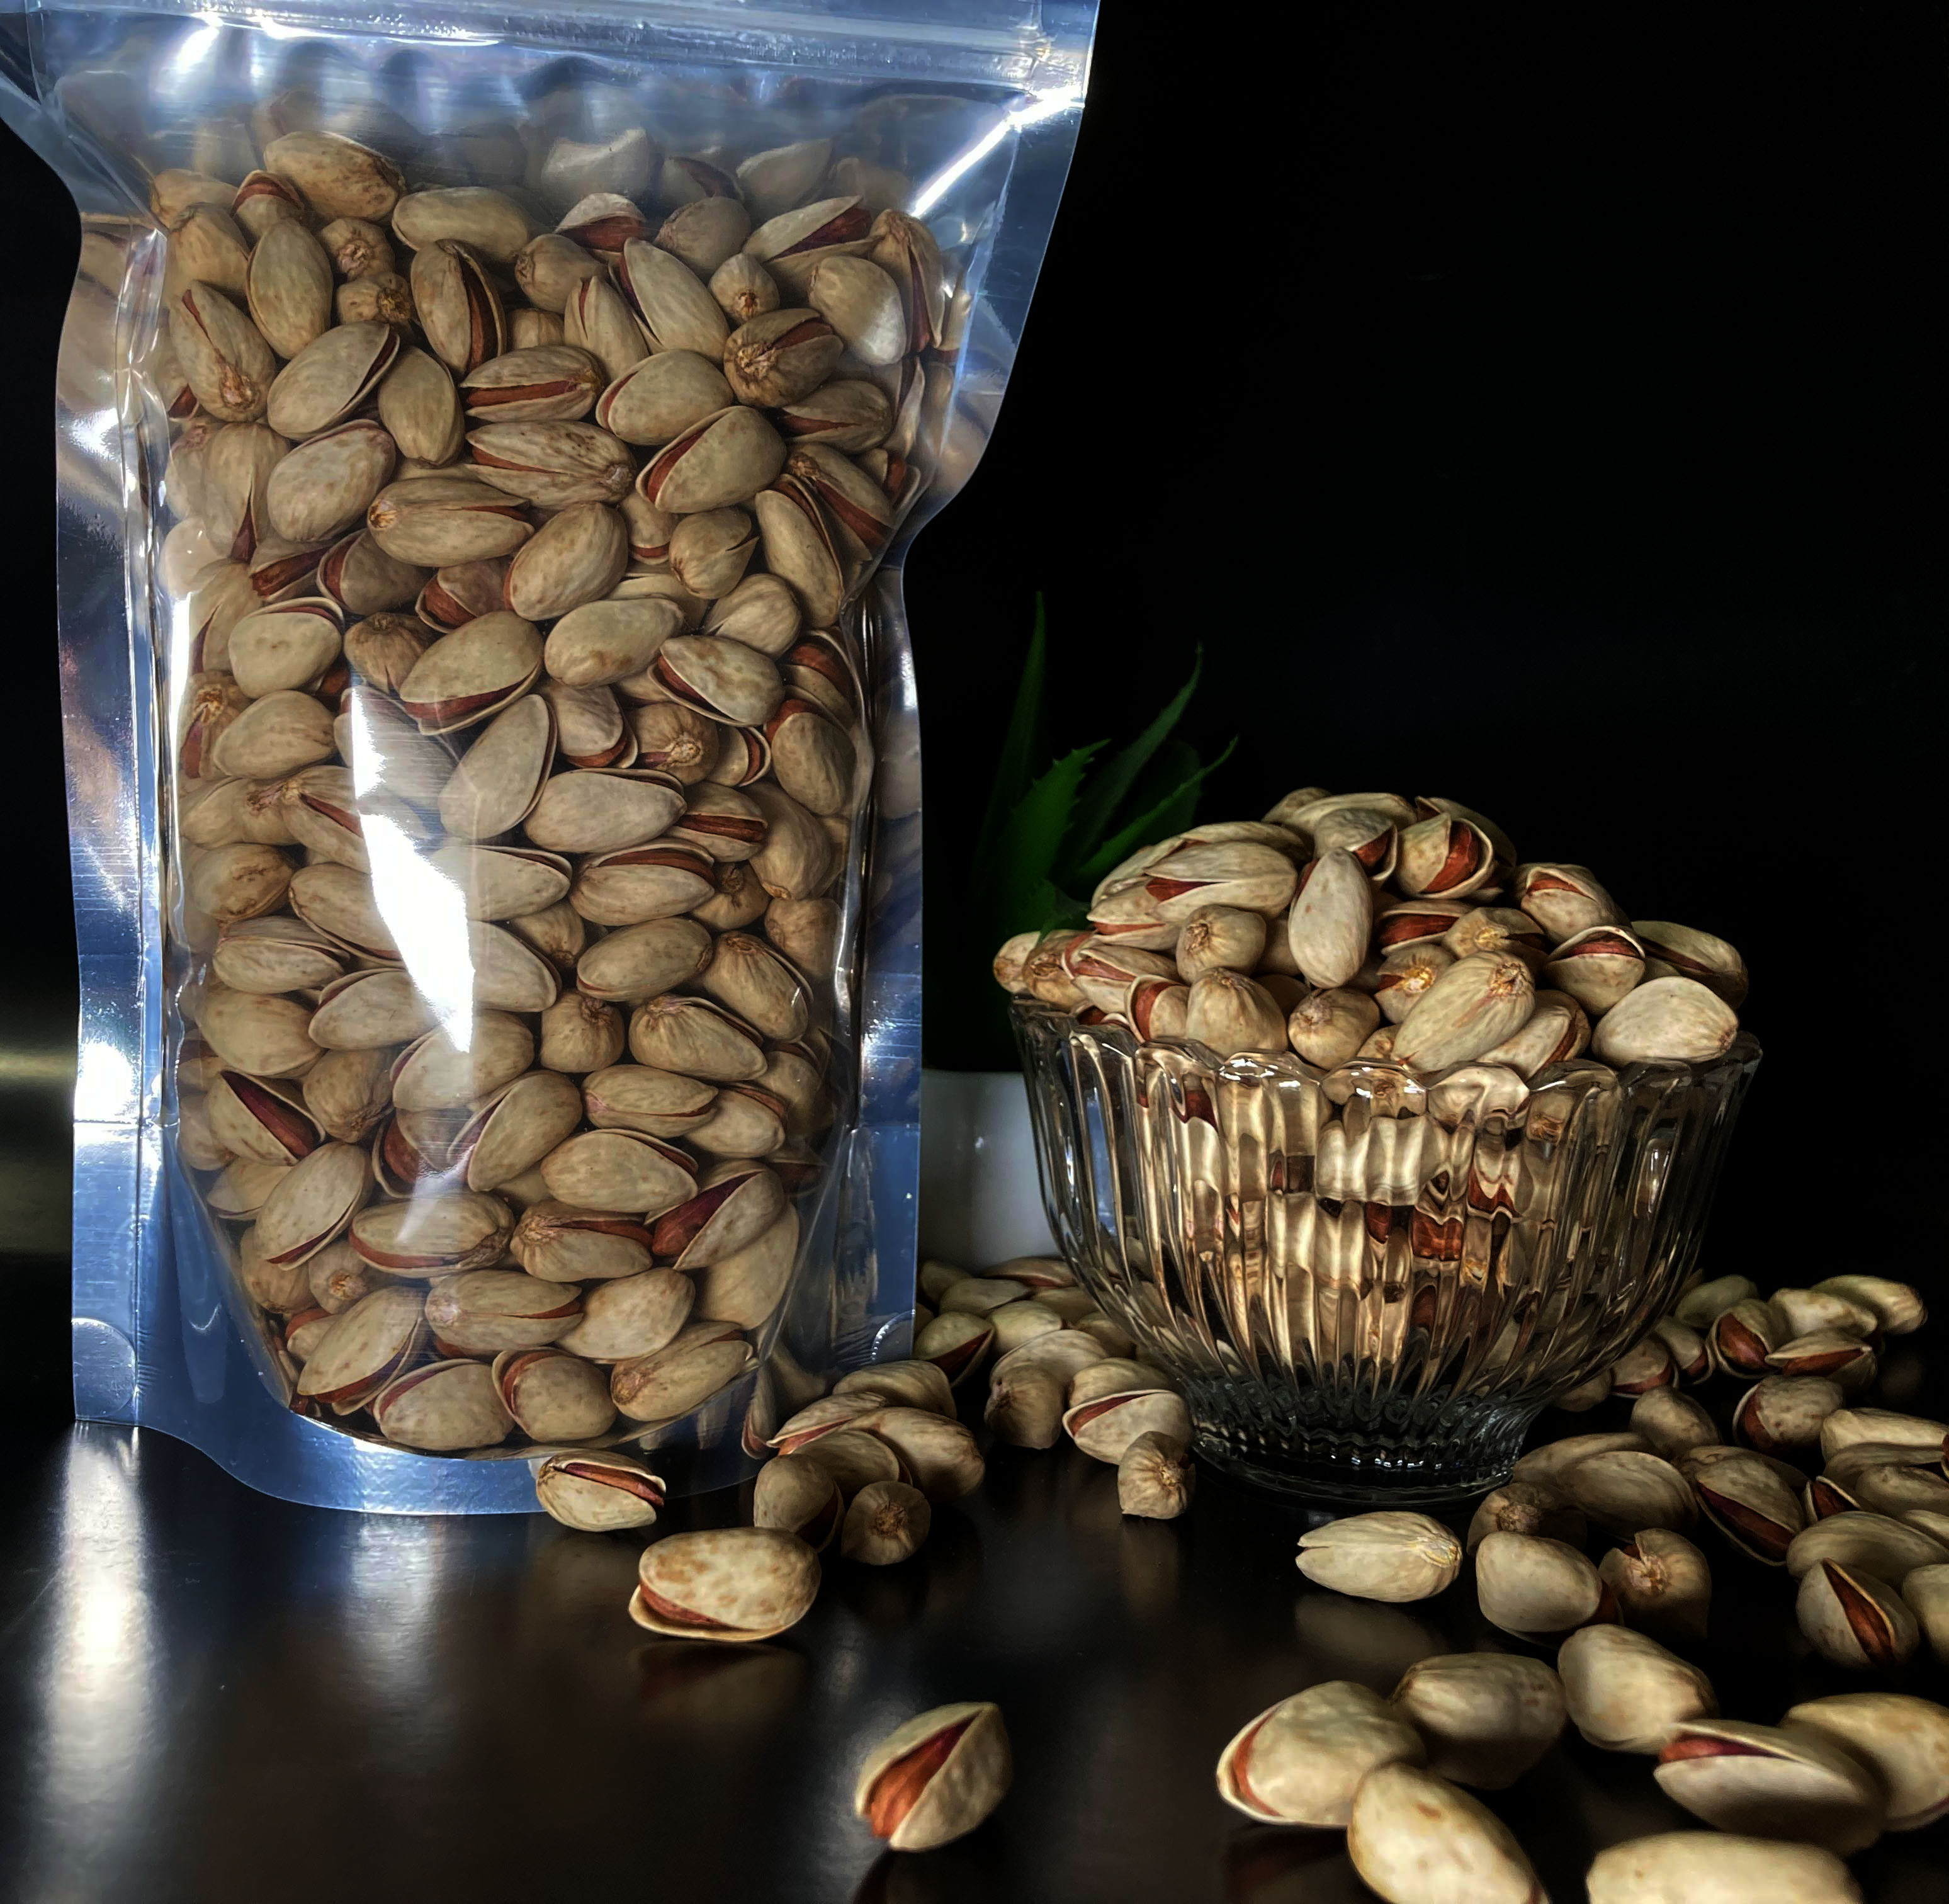 Raw pistachios 450 grams, Abbas Ali, 25 to 26 ounces, Momenabad, Damghan, organic and produced without poison